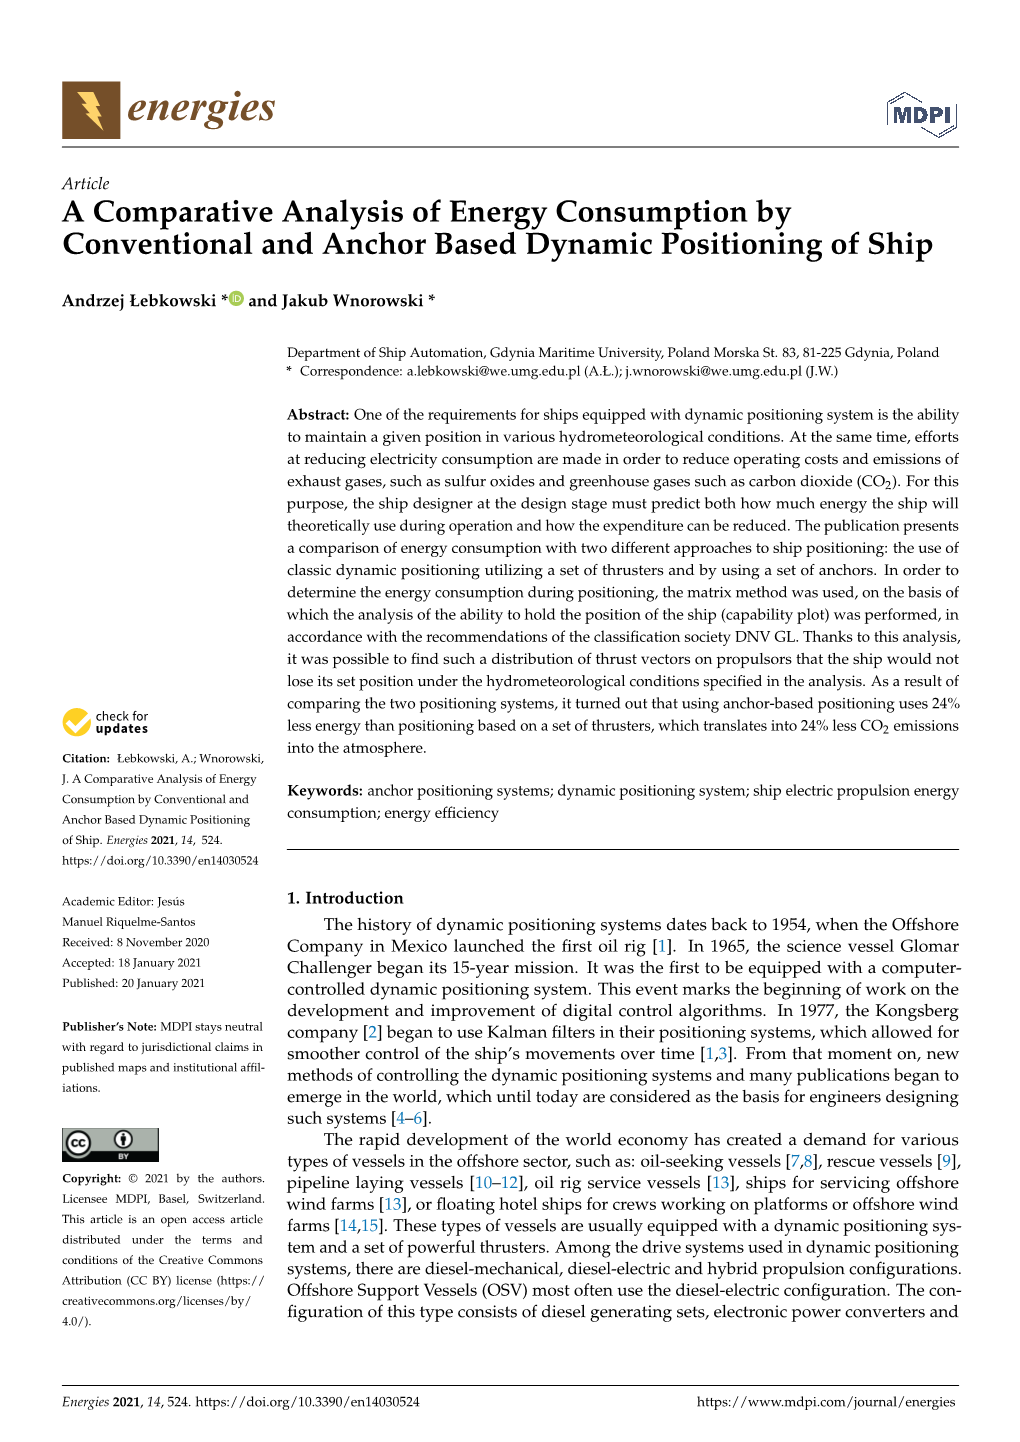 A Comparative Analysis of Energy Consumption by Conventional and Anchor Based Dynamic Positioning of Ship